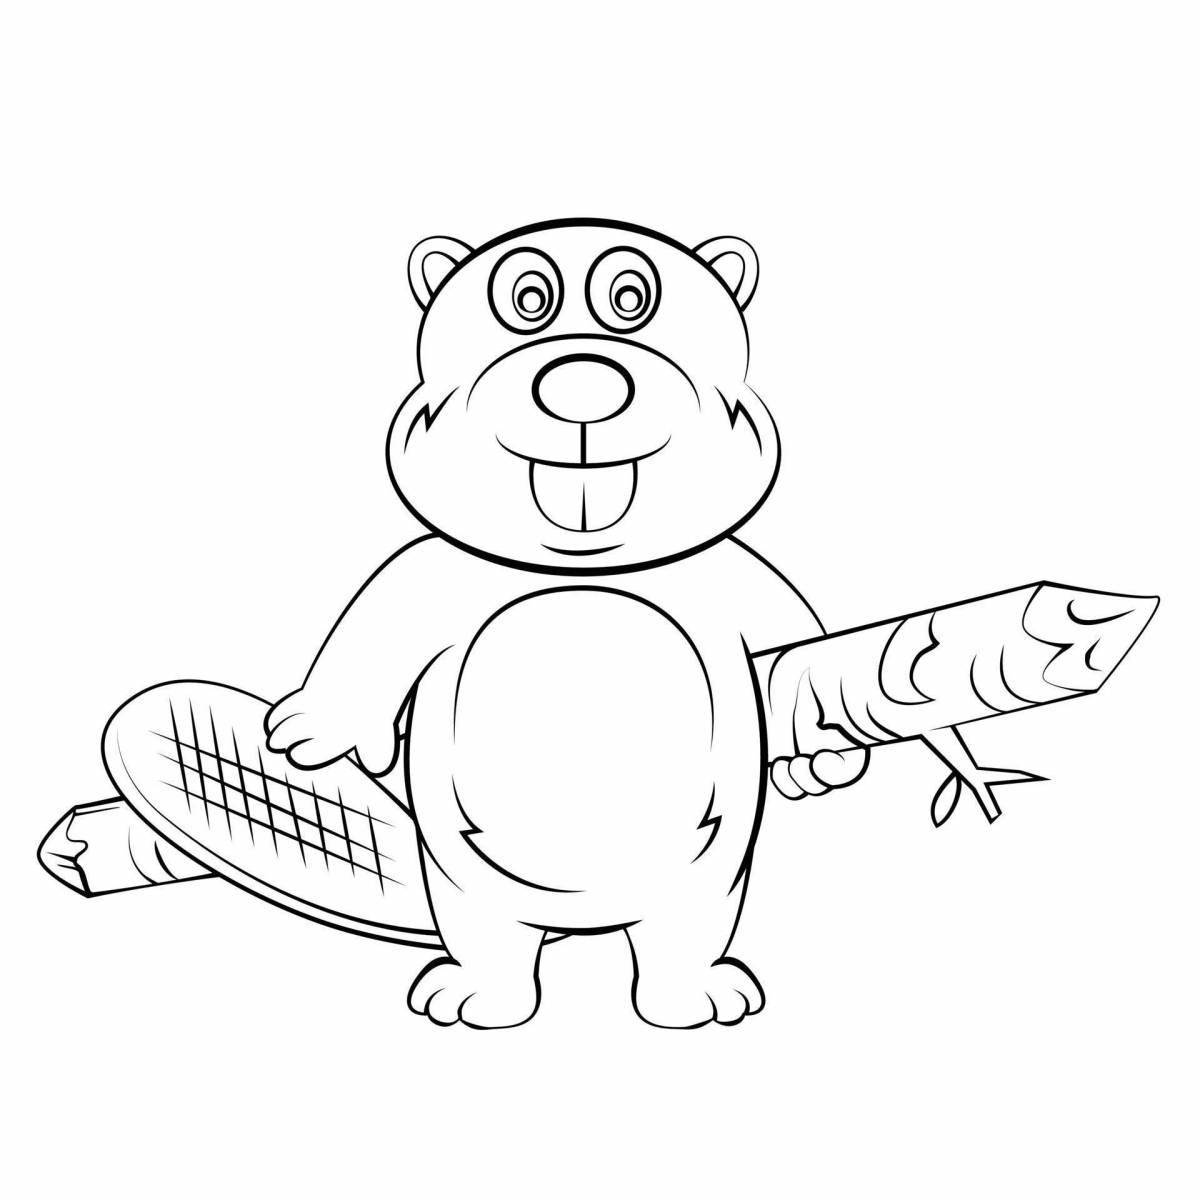 Coloring page happy beaver